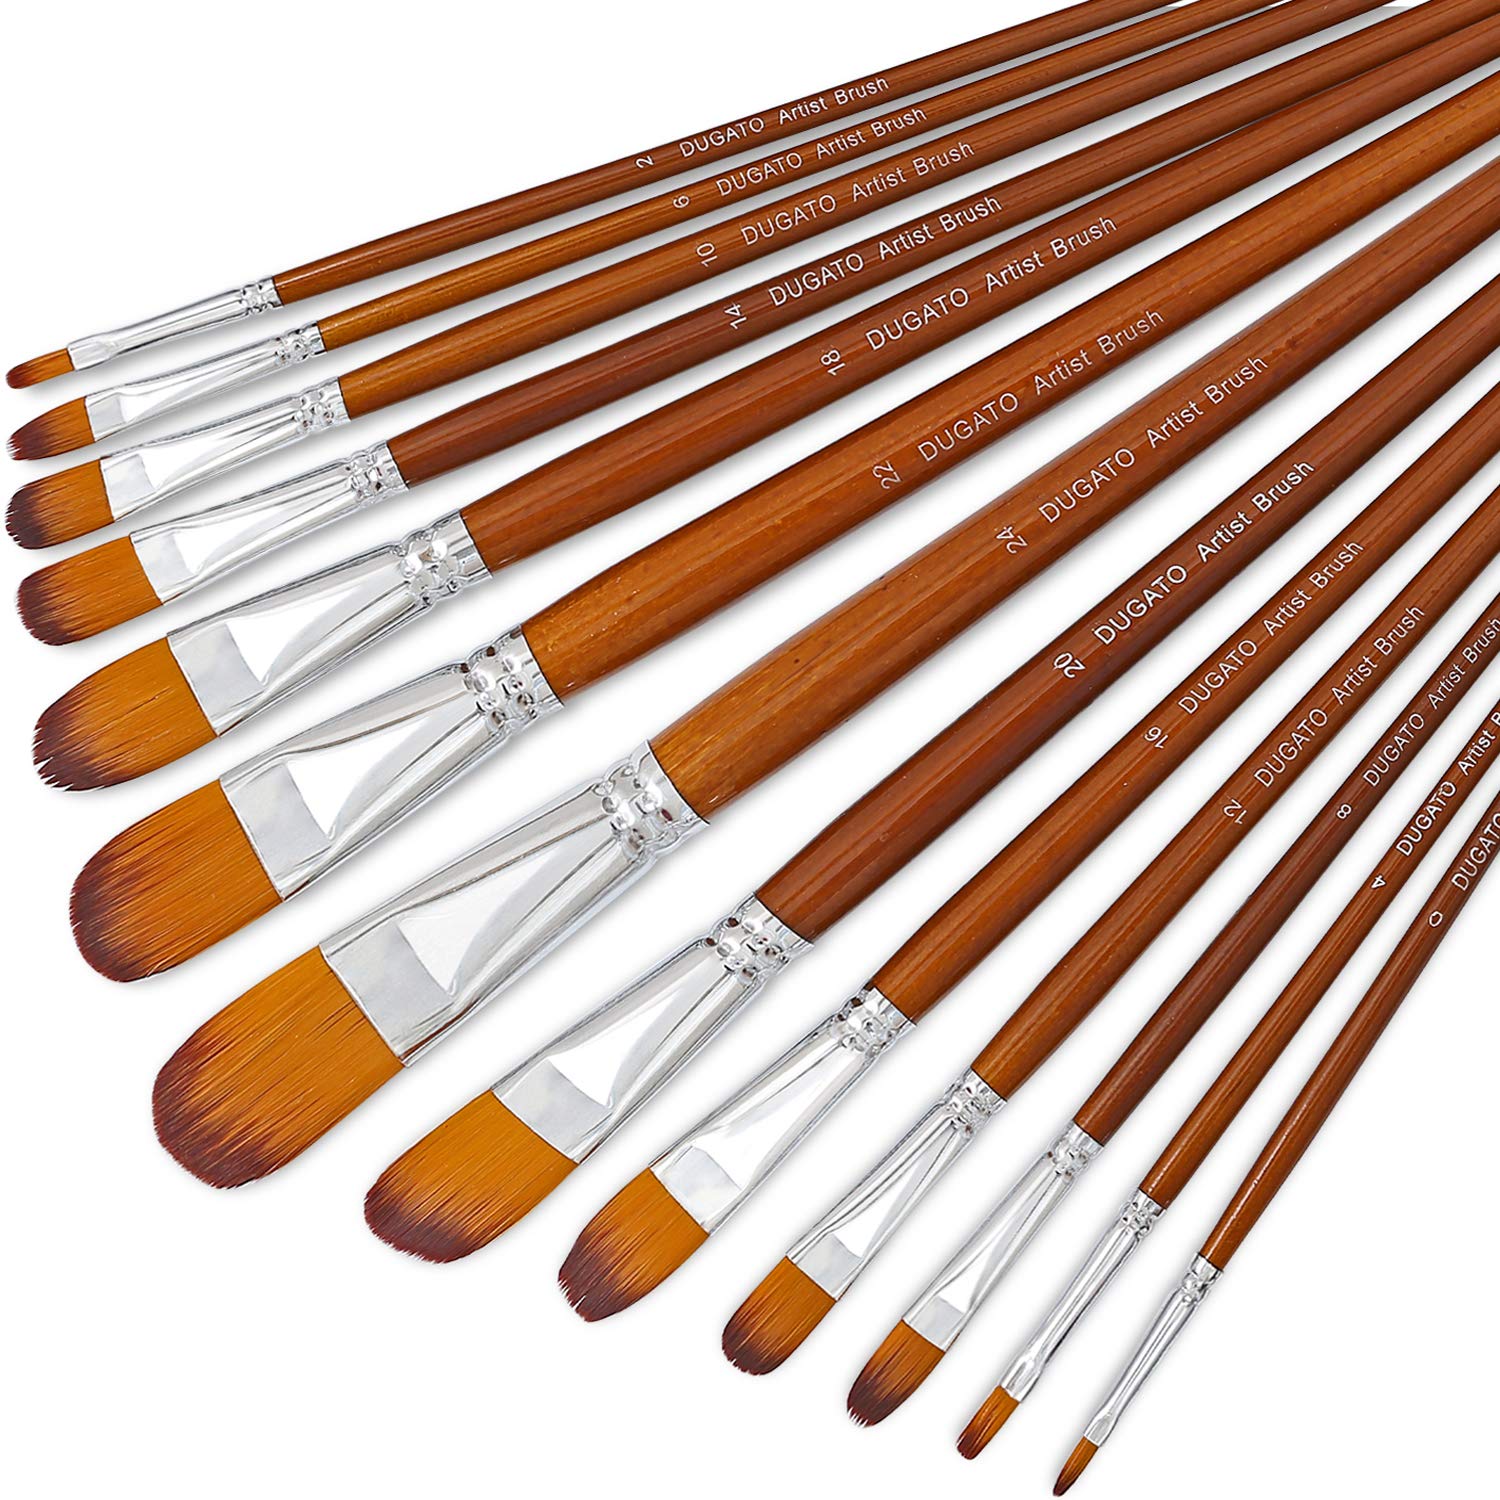 7pcs/set Art Paint Brushes Set Round & Flat & Filbert & Fan Tips Professional Drawing Paintbrushes Nylon Hair Wooden Handle for Watercolor Acrylic Oil